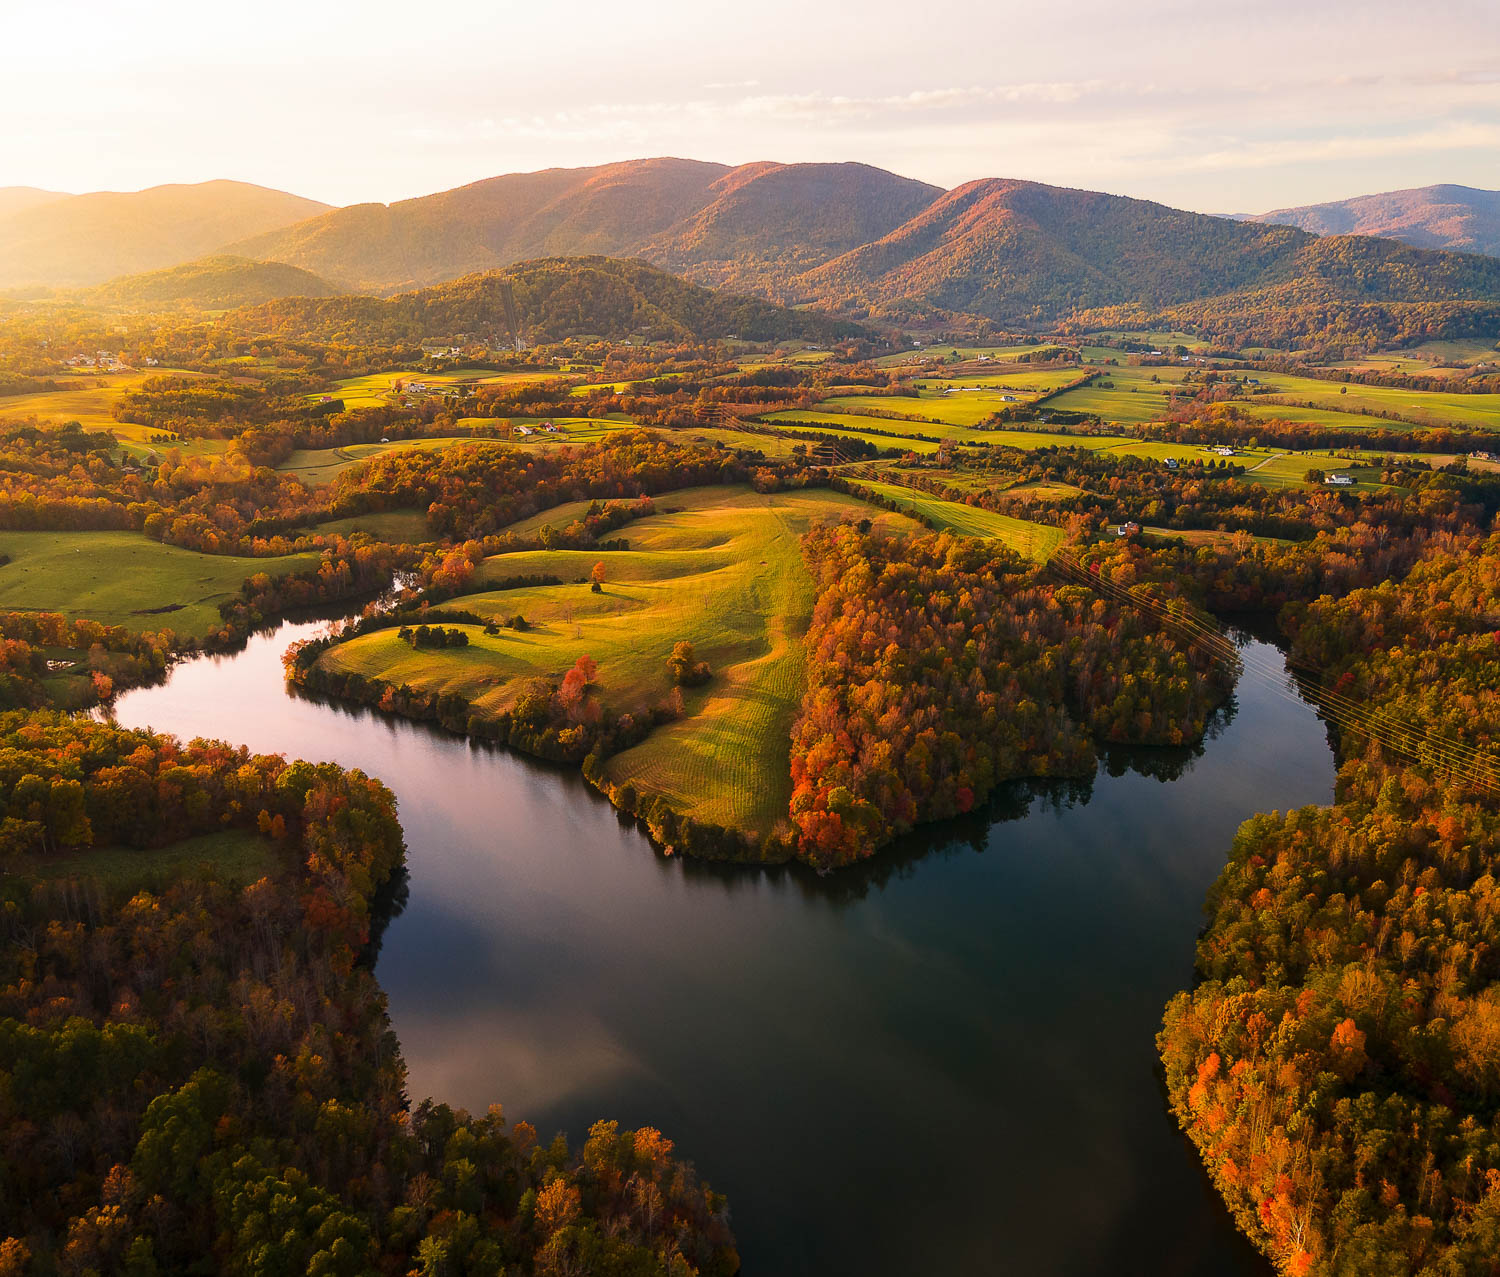 sunset falls over a reservoir surrounded by autumnal foliage and green pastures, with mountains on the horizon